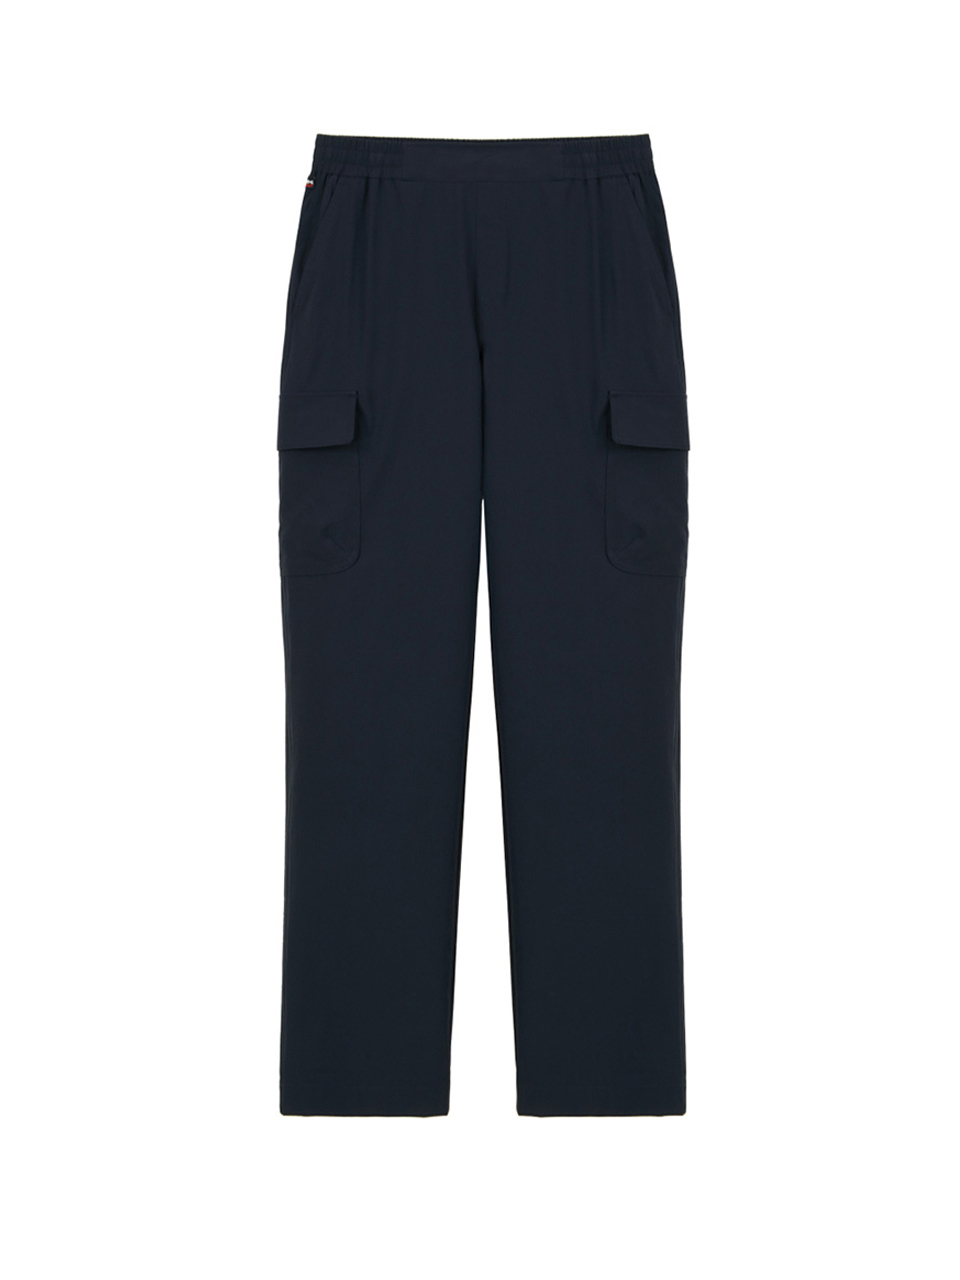 [LIMITED] SUMMER STRETCH SOLID COOL PANTS (FOR MAN) - SOFT NAVY - BENSIMON